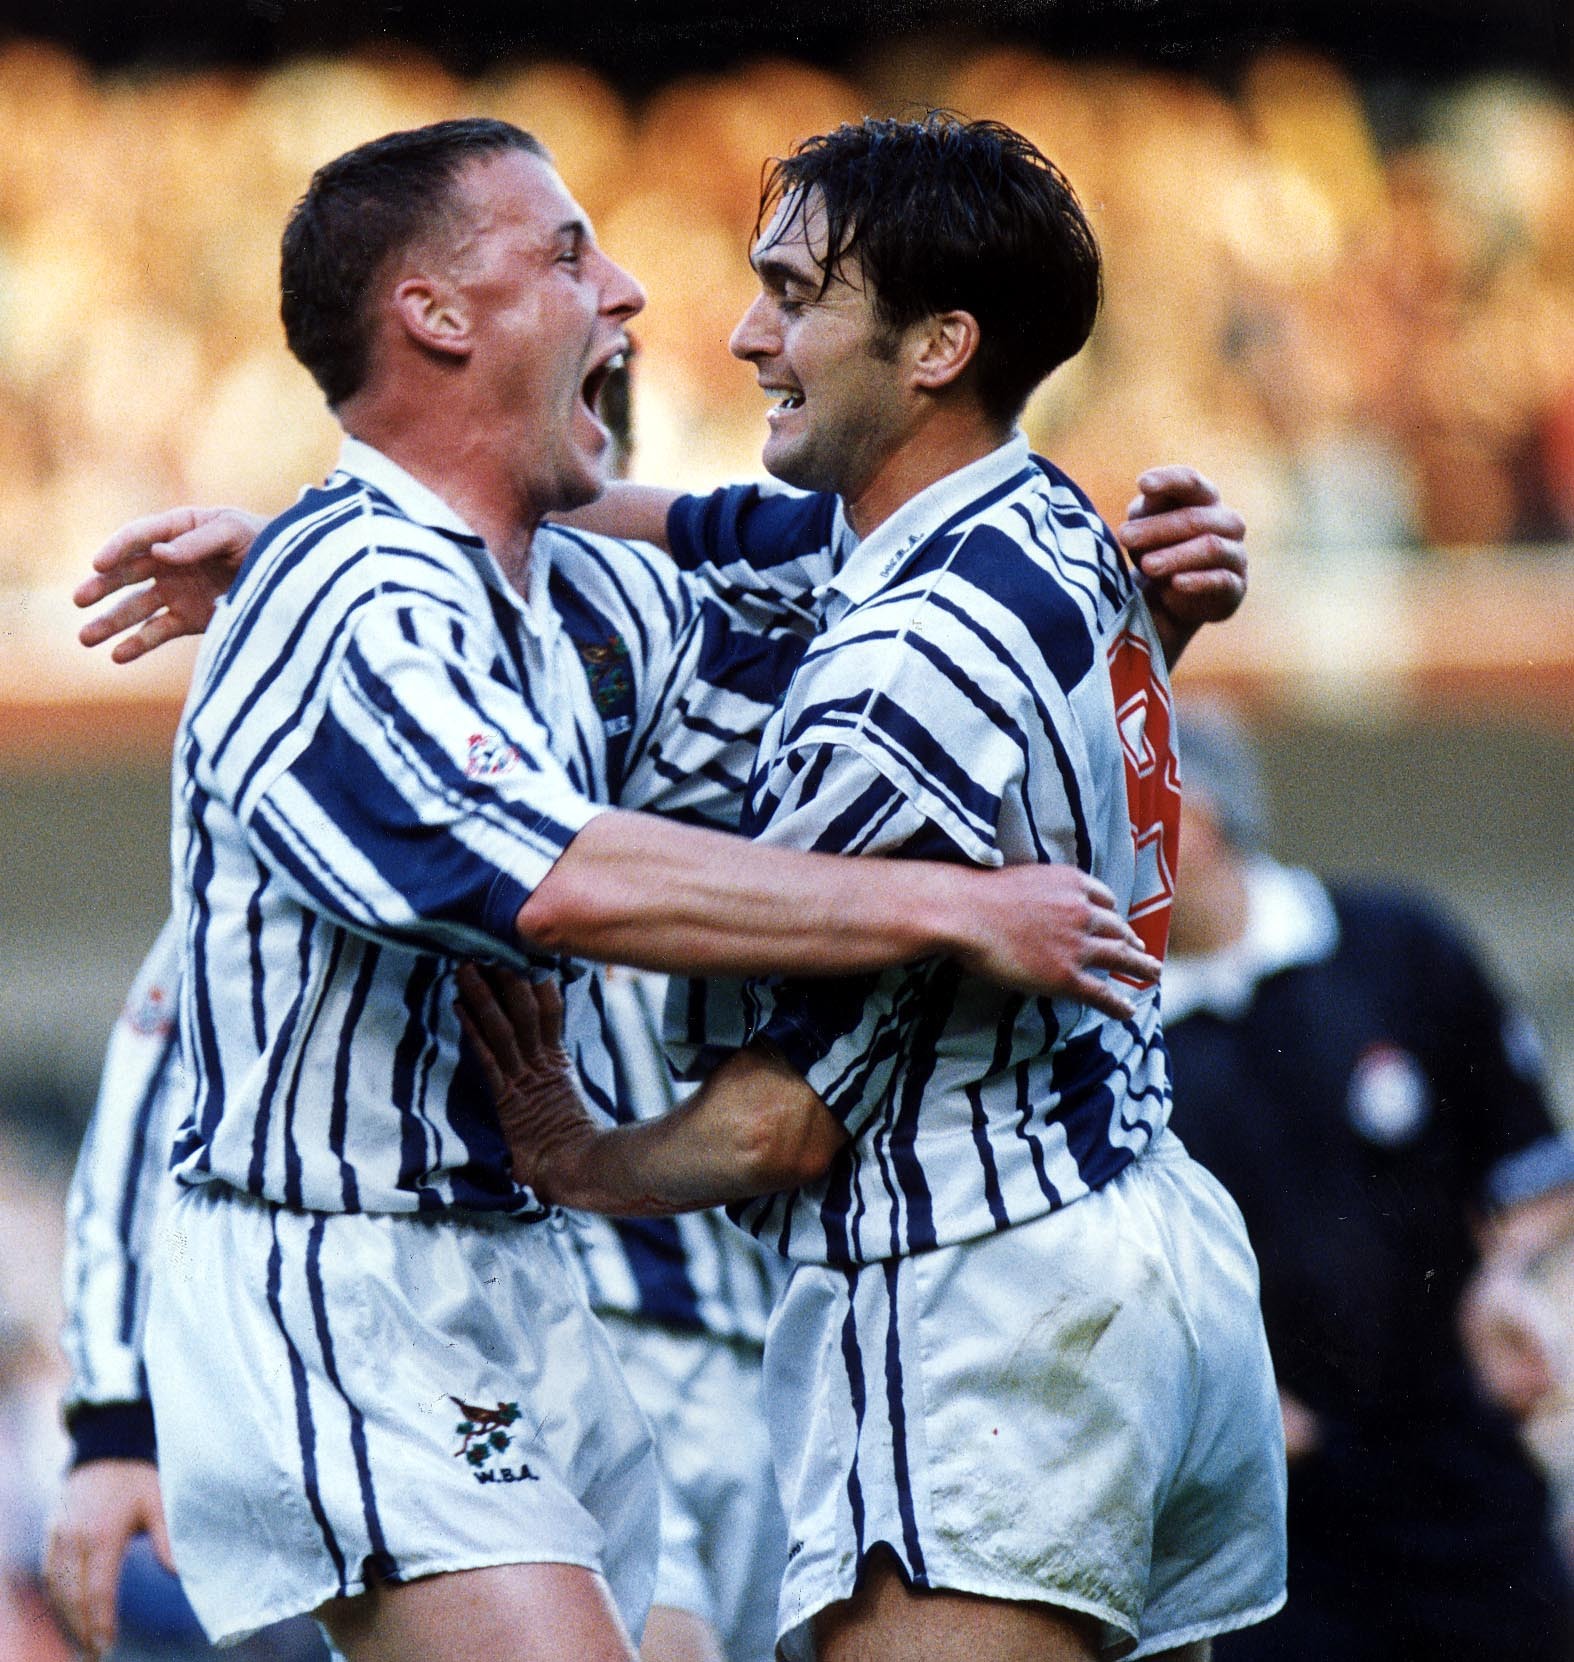 West Bromwich Albion FC Andy Hunt 93 Home Tasse